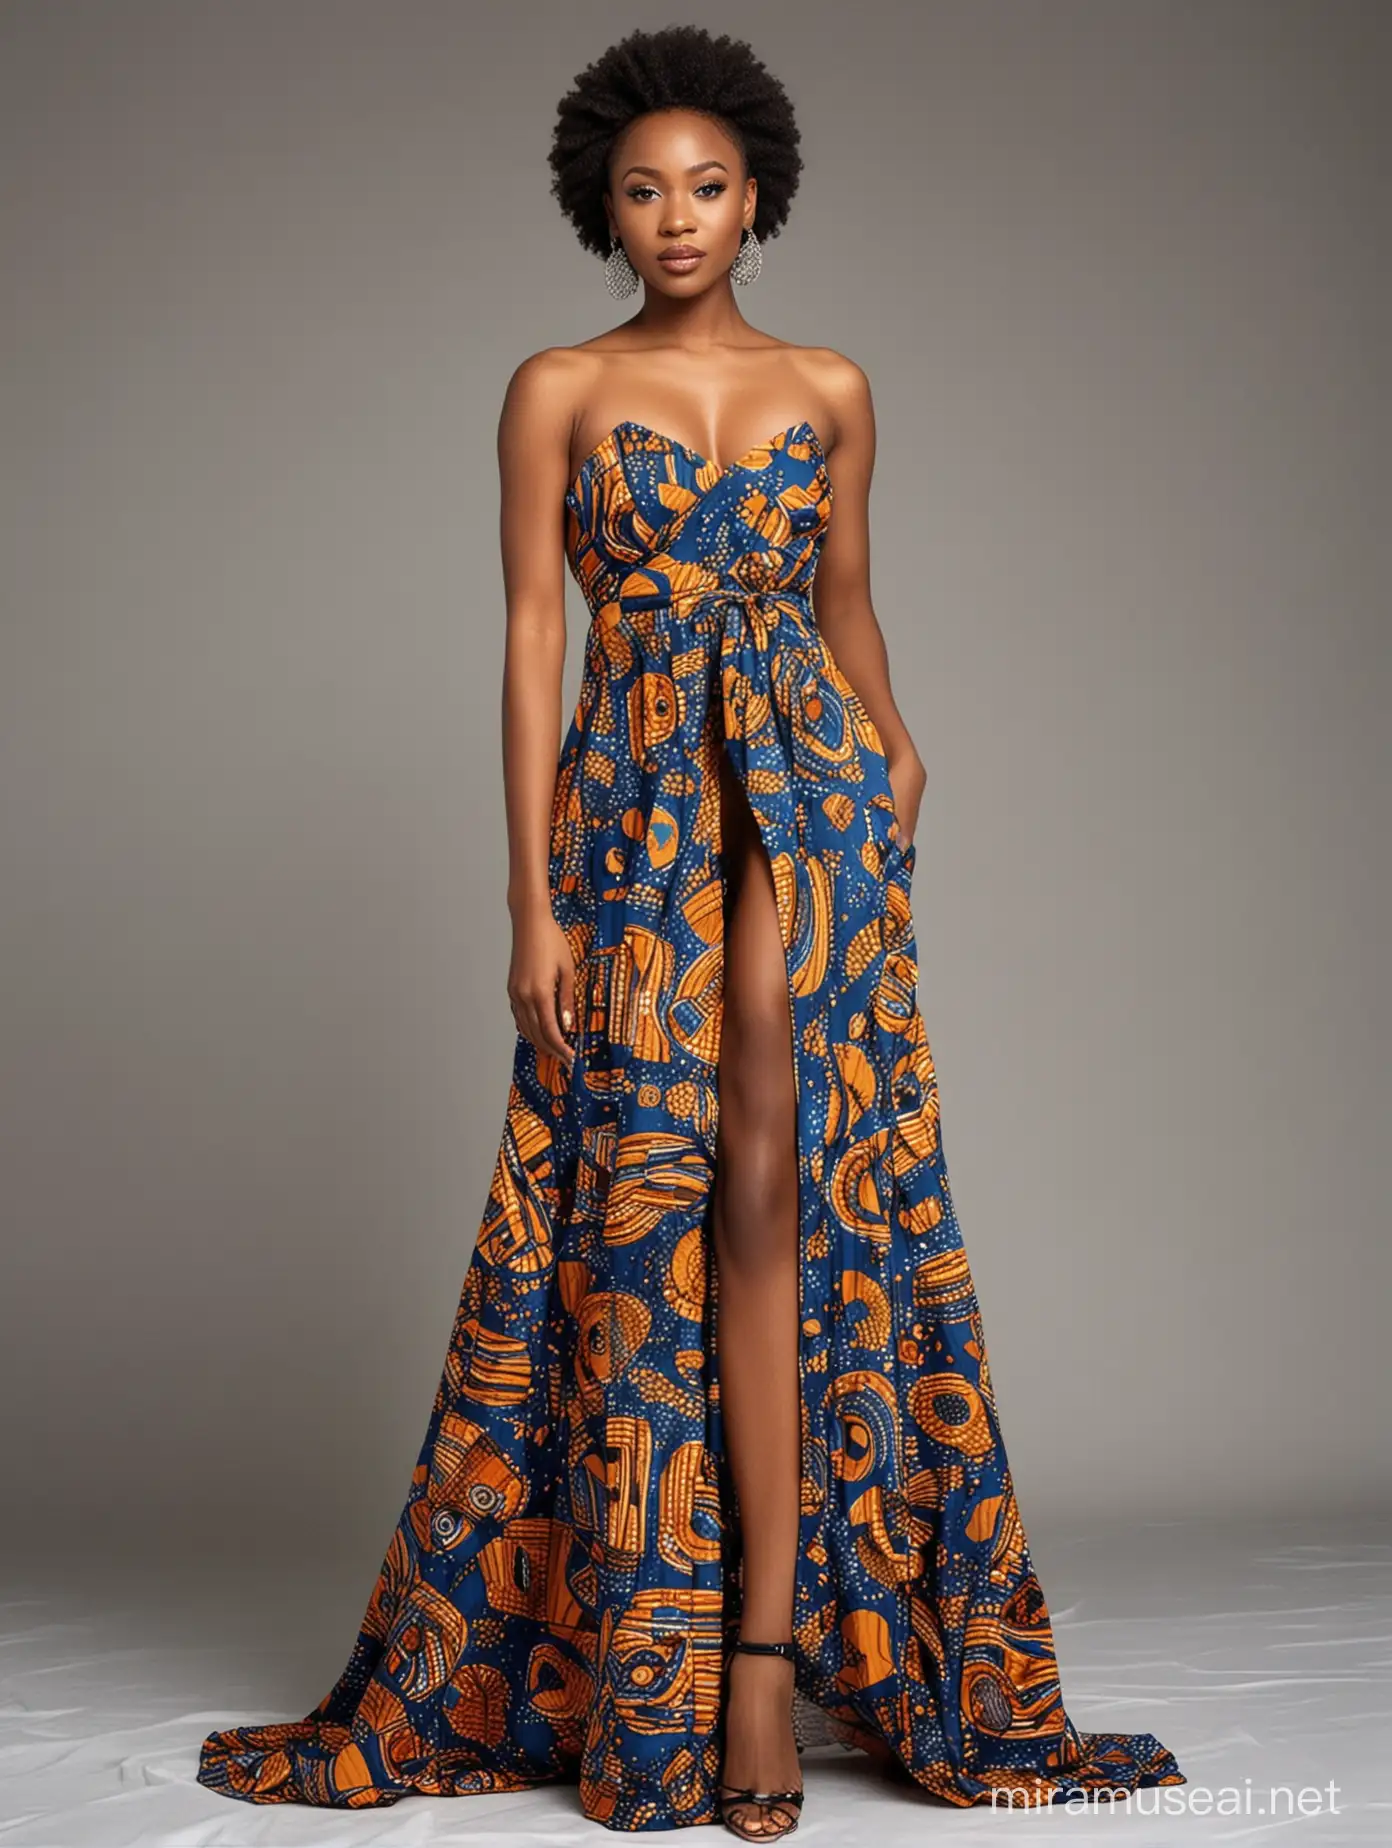 A sexy african lady dressed in simple gown with African prints